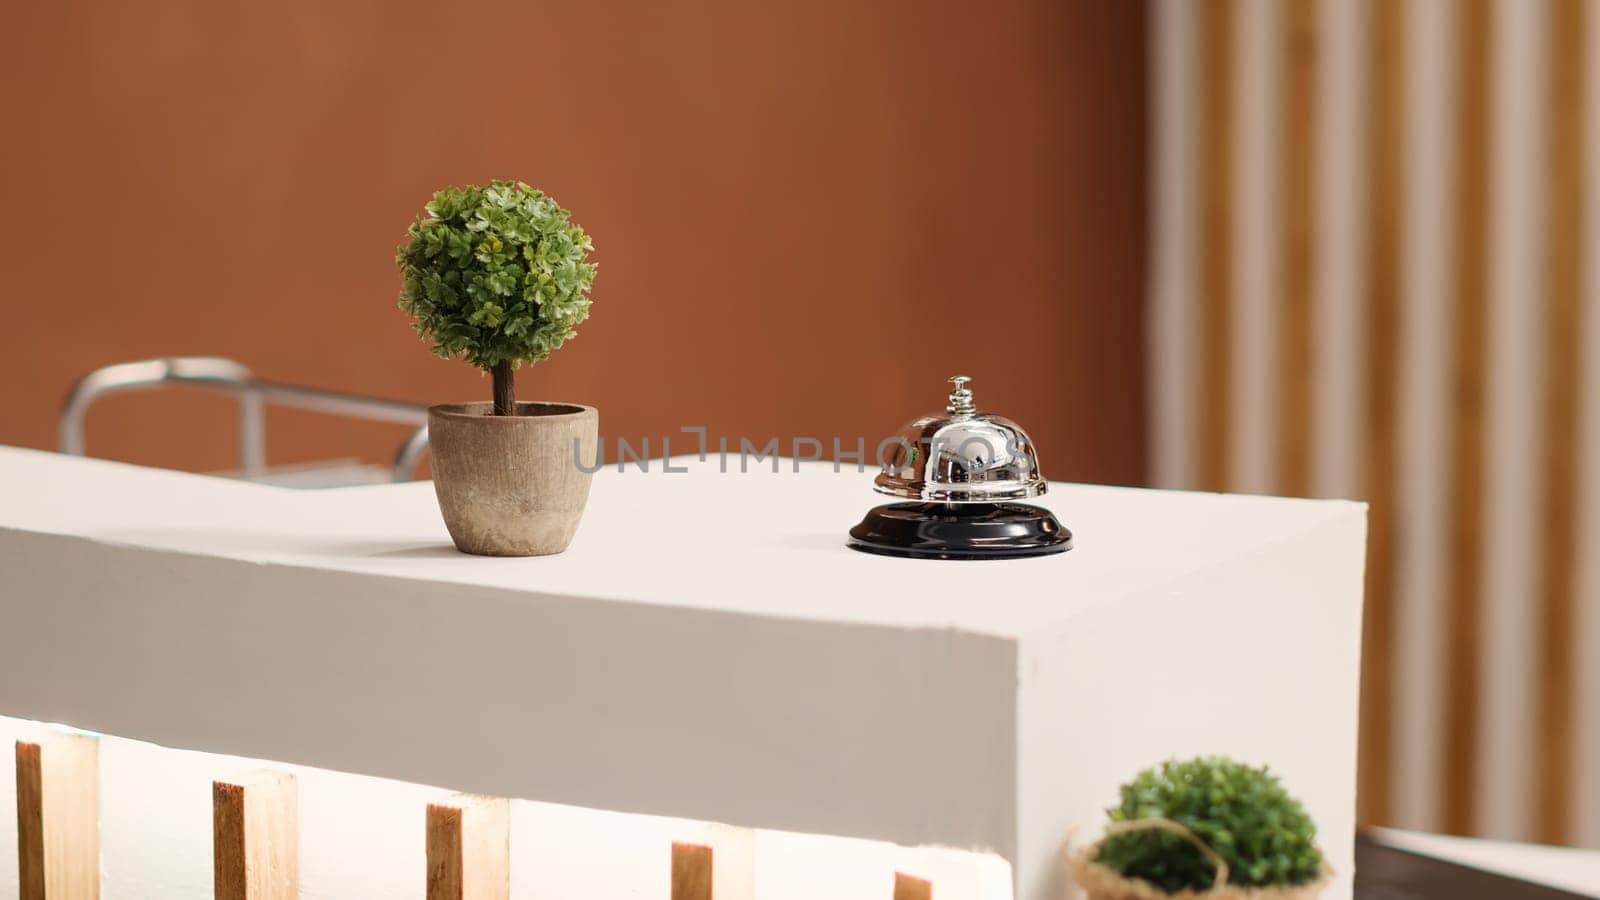 Elegant concierge bell on modern stylish hotel lobby check in desk. Reception bell next to mini plant on empty warm hospitality industry lounge reception counter, close up